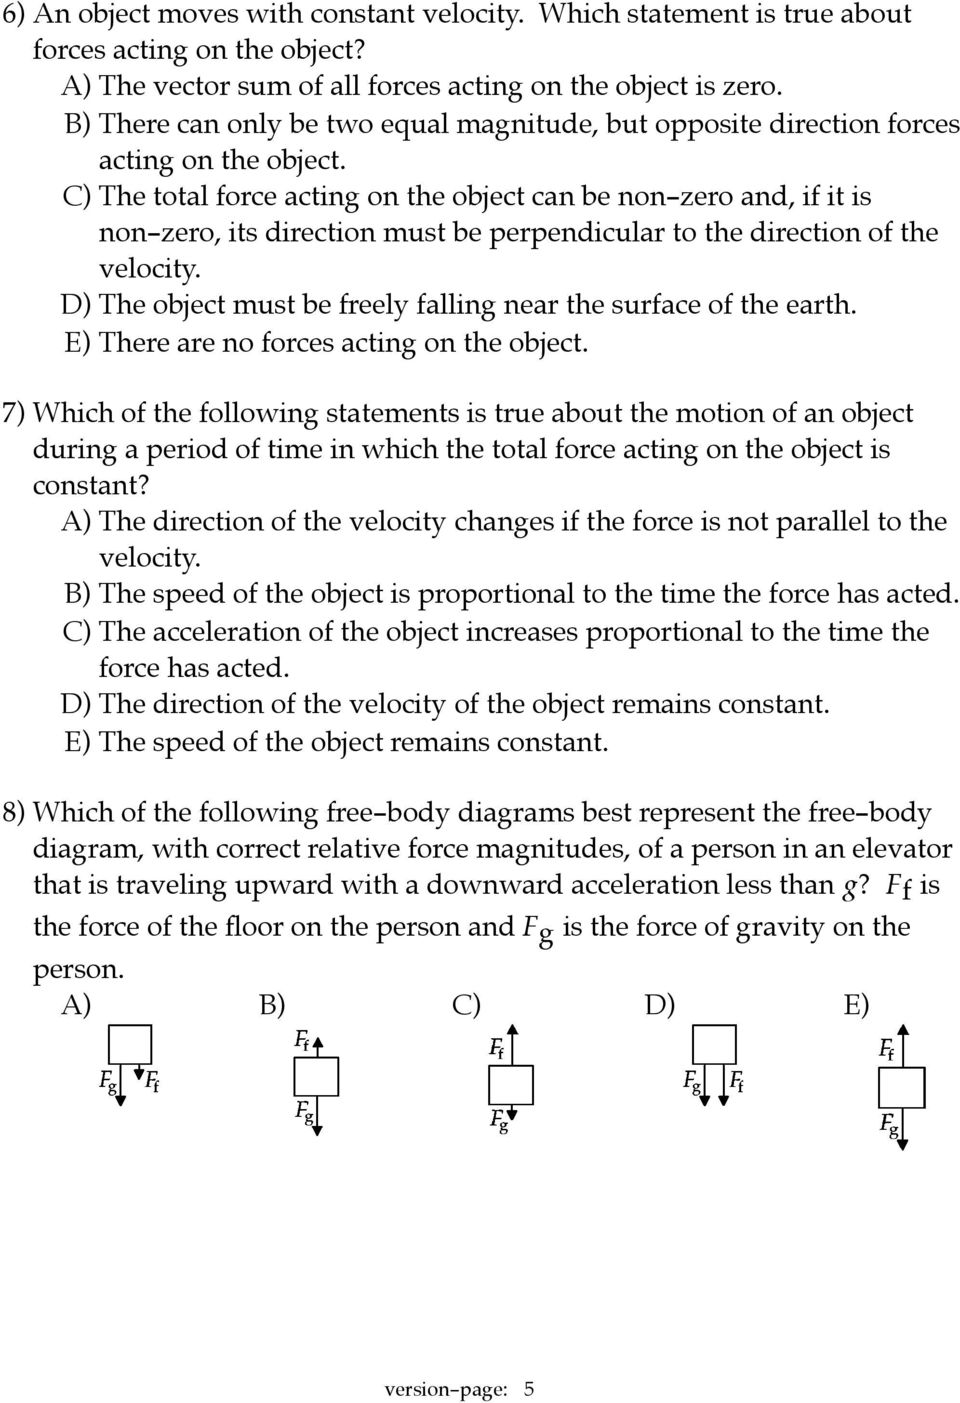 C) The total force acting on the object can be non-zero and, if it is non-zero, its direction must be perpendicular to the direction of the velocity.